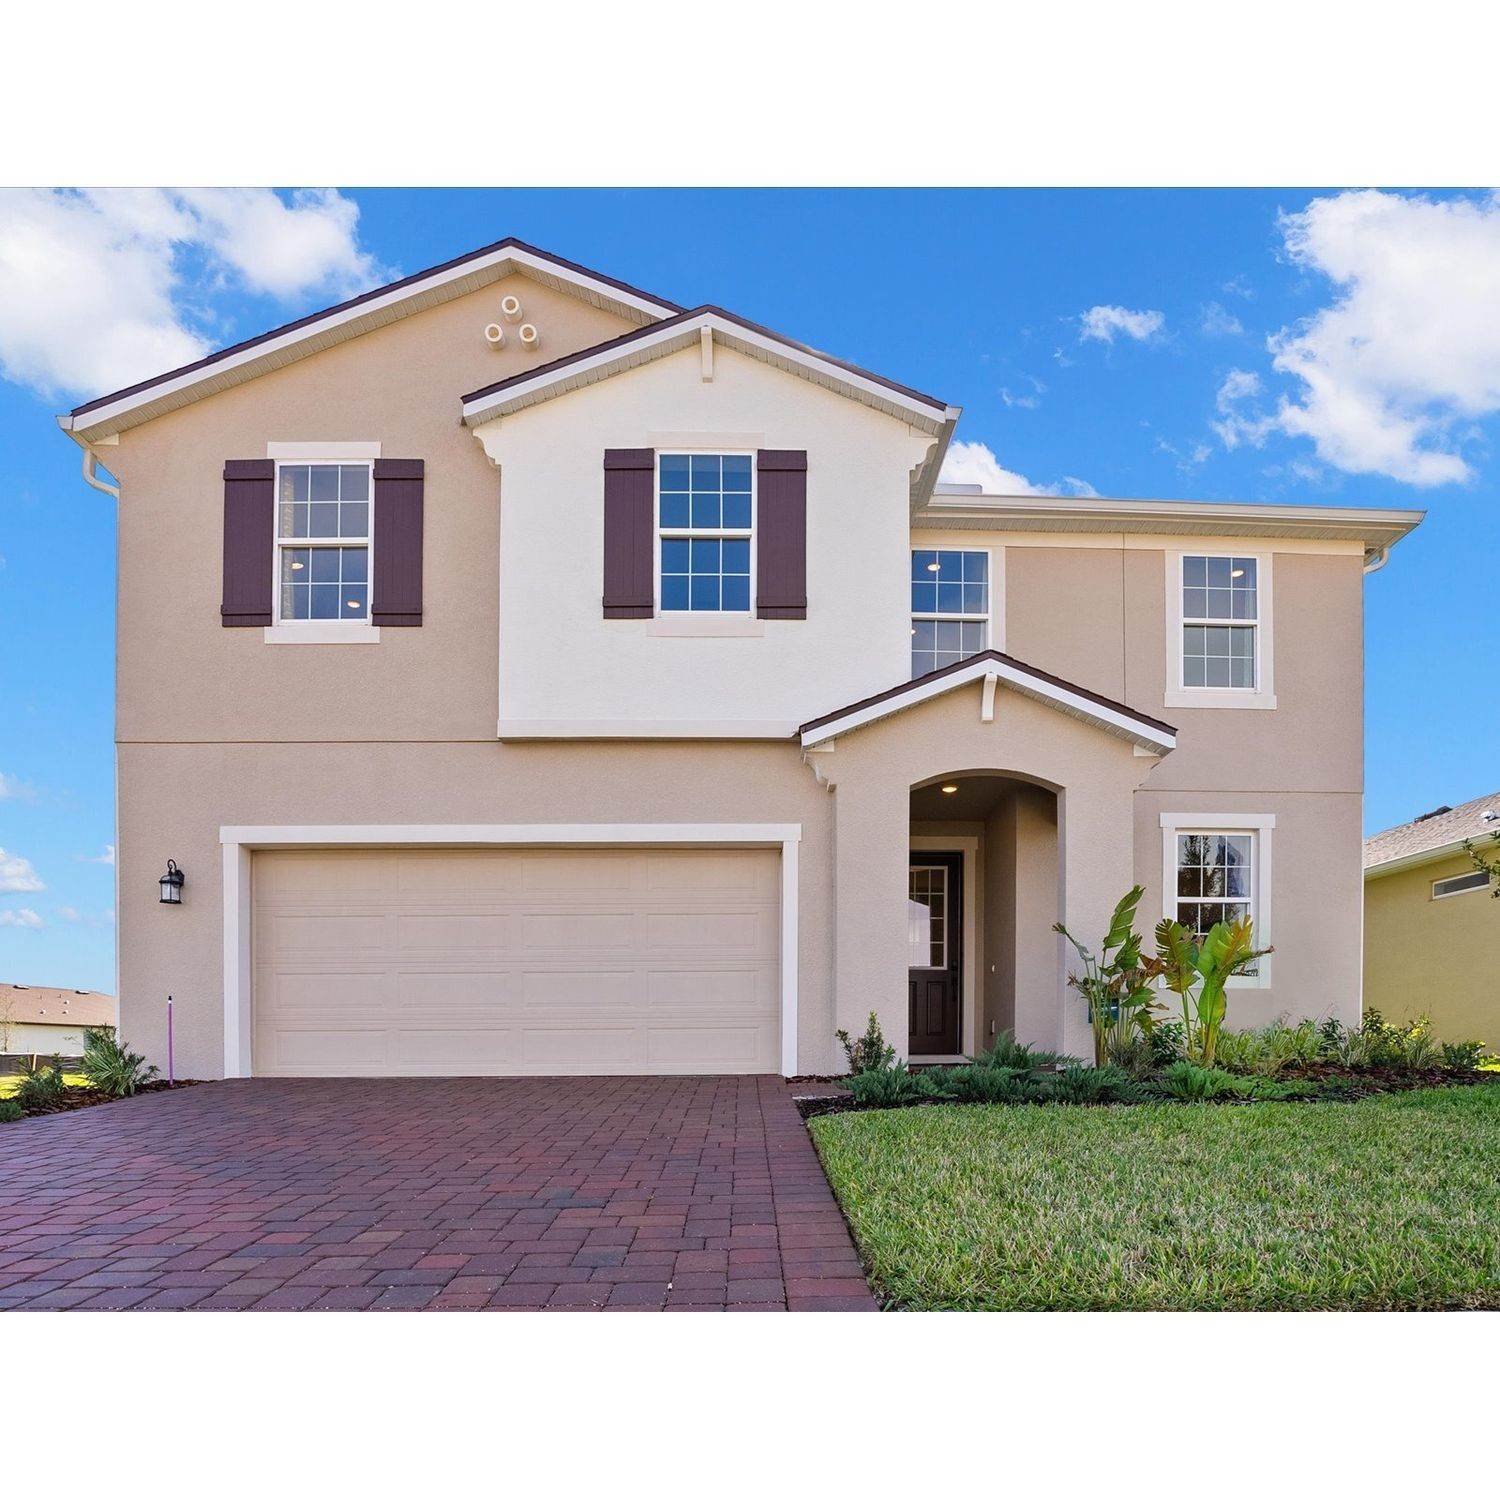 21. Waterbrooke bâtiment à 3029 Ambersweet Place, Clermont, FL 34711